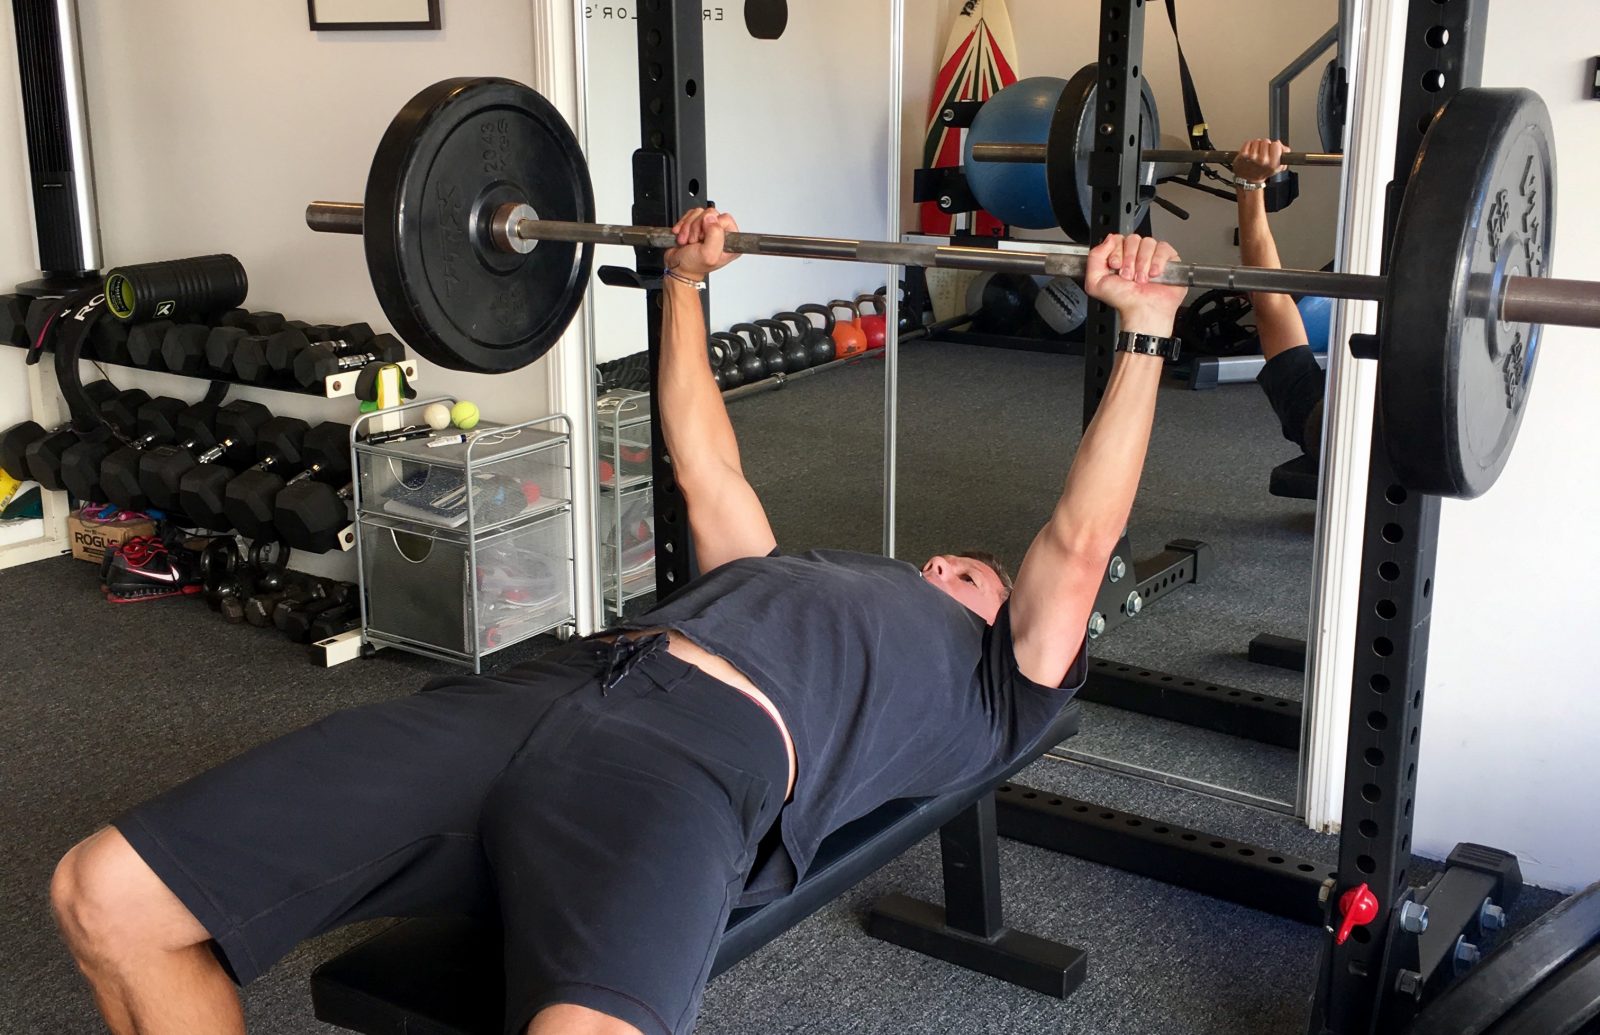 3 Technique Hacks To Improve Your Benchpress Right Now.